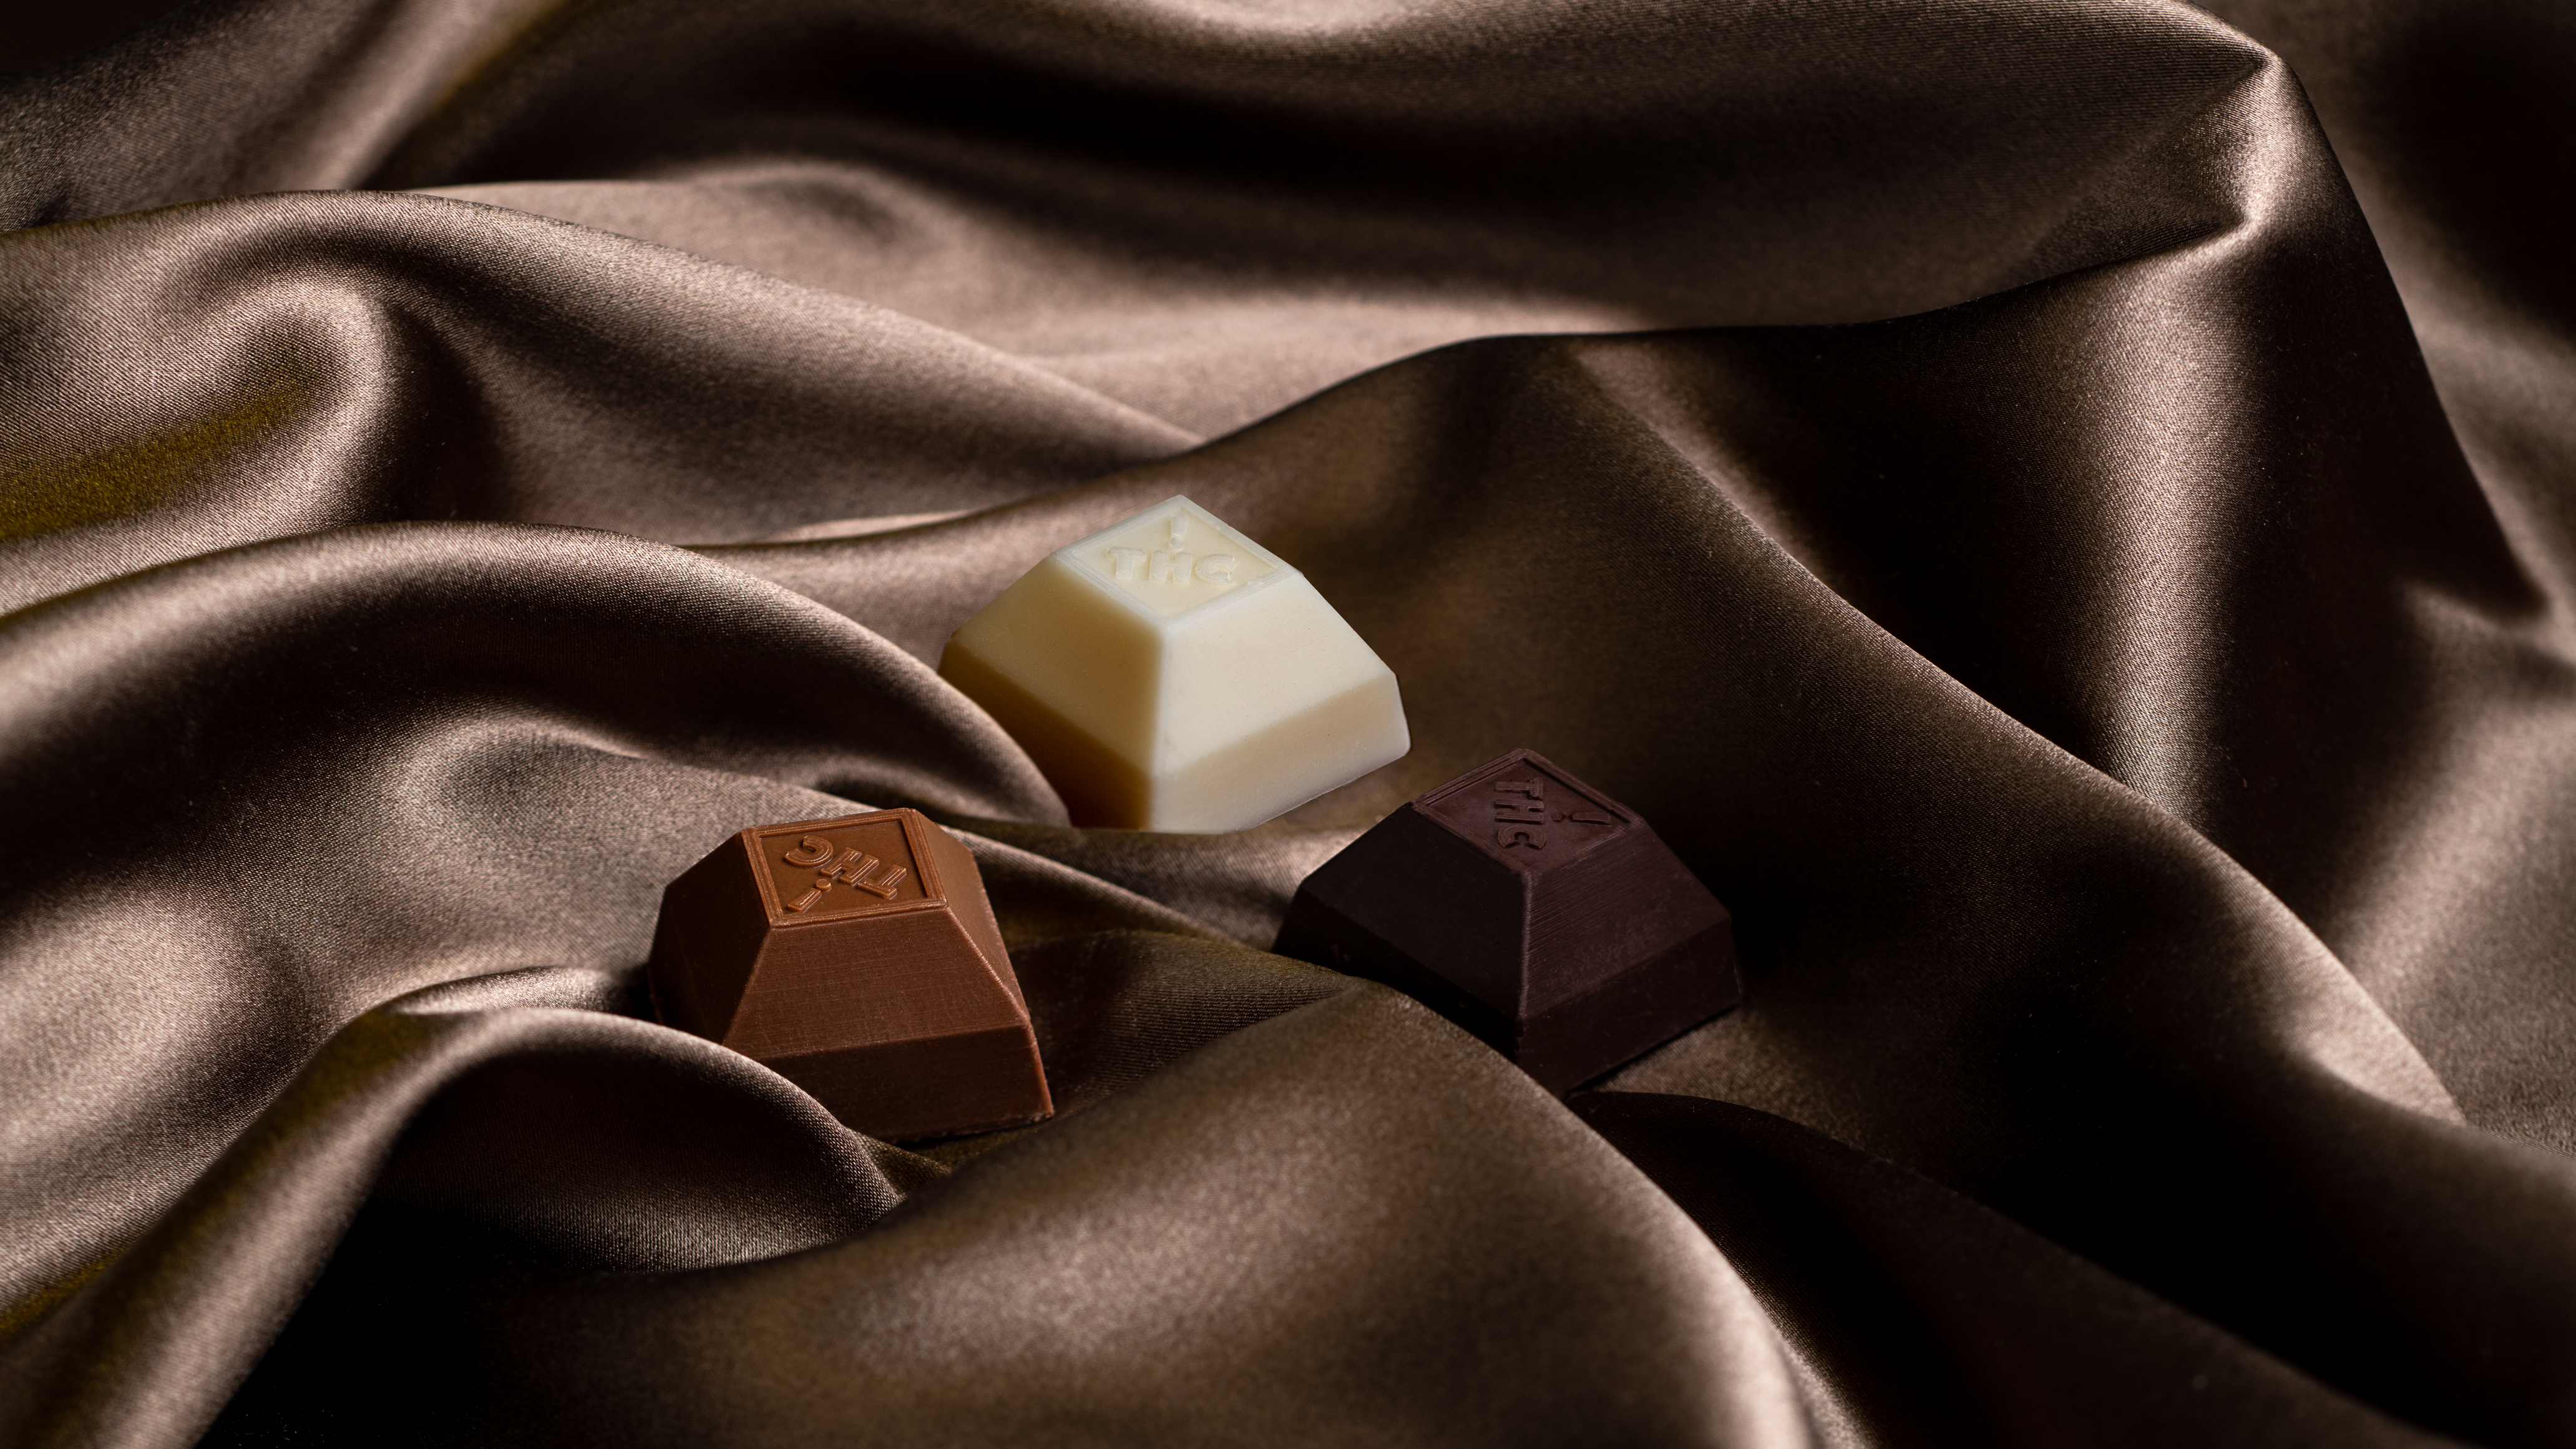 Three squares of milk, white, and dark chocolate from Nove, resting on silk.